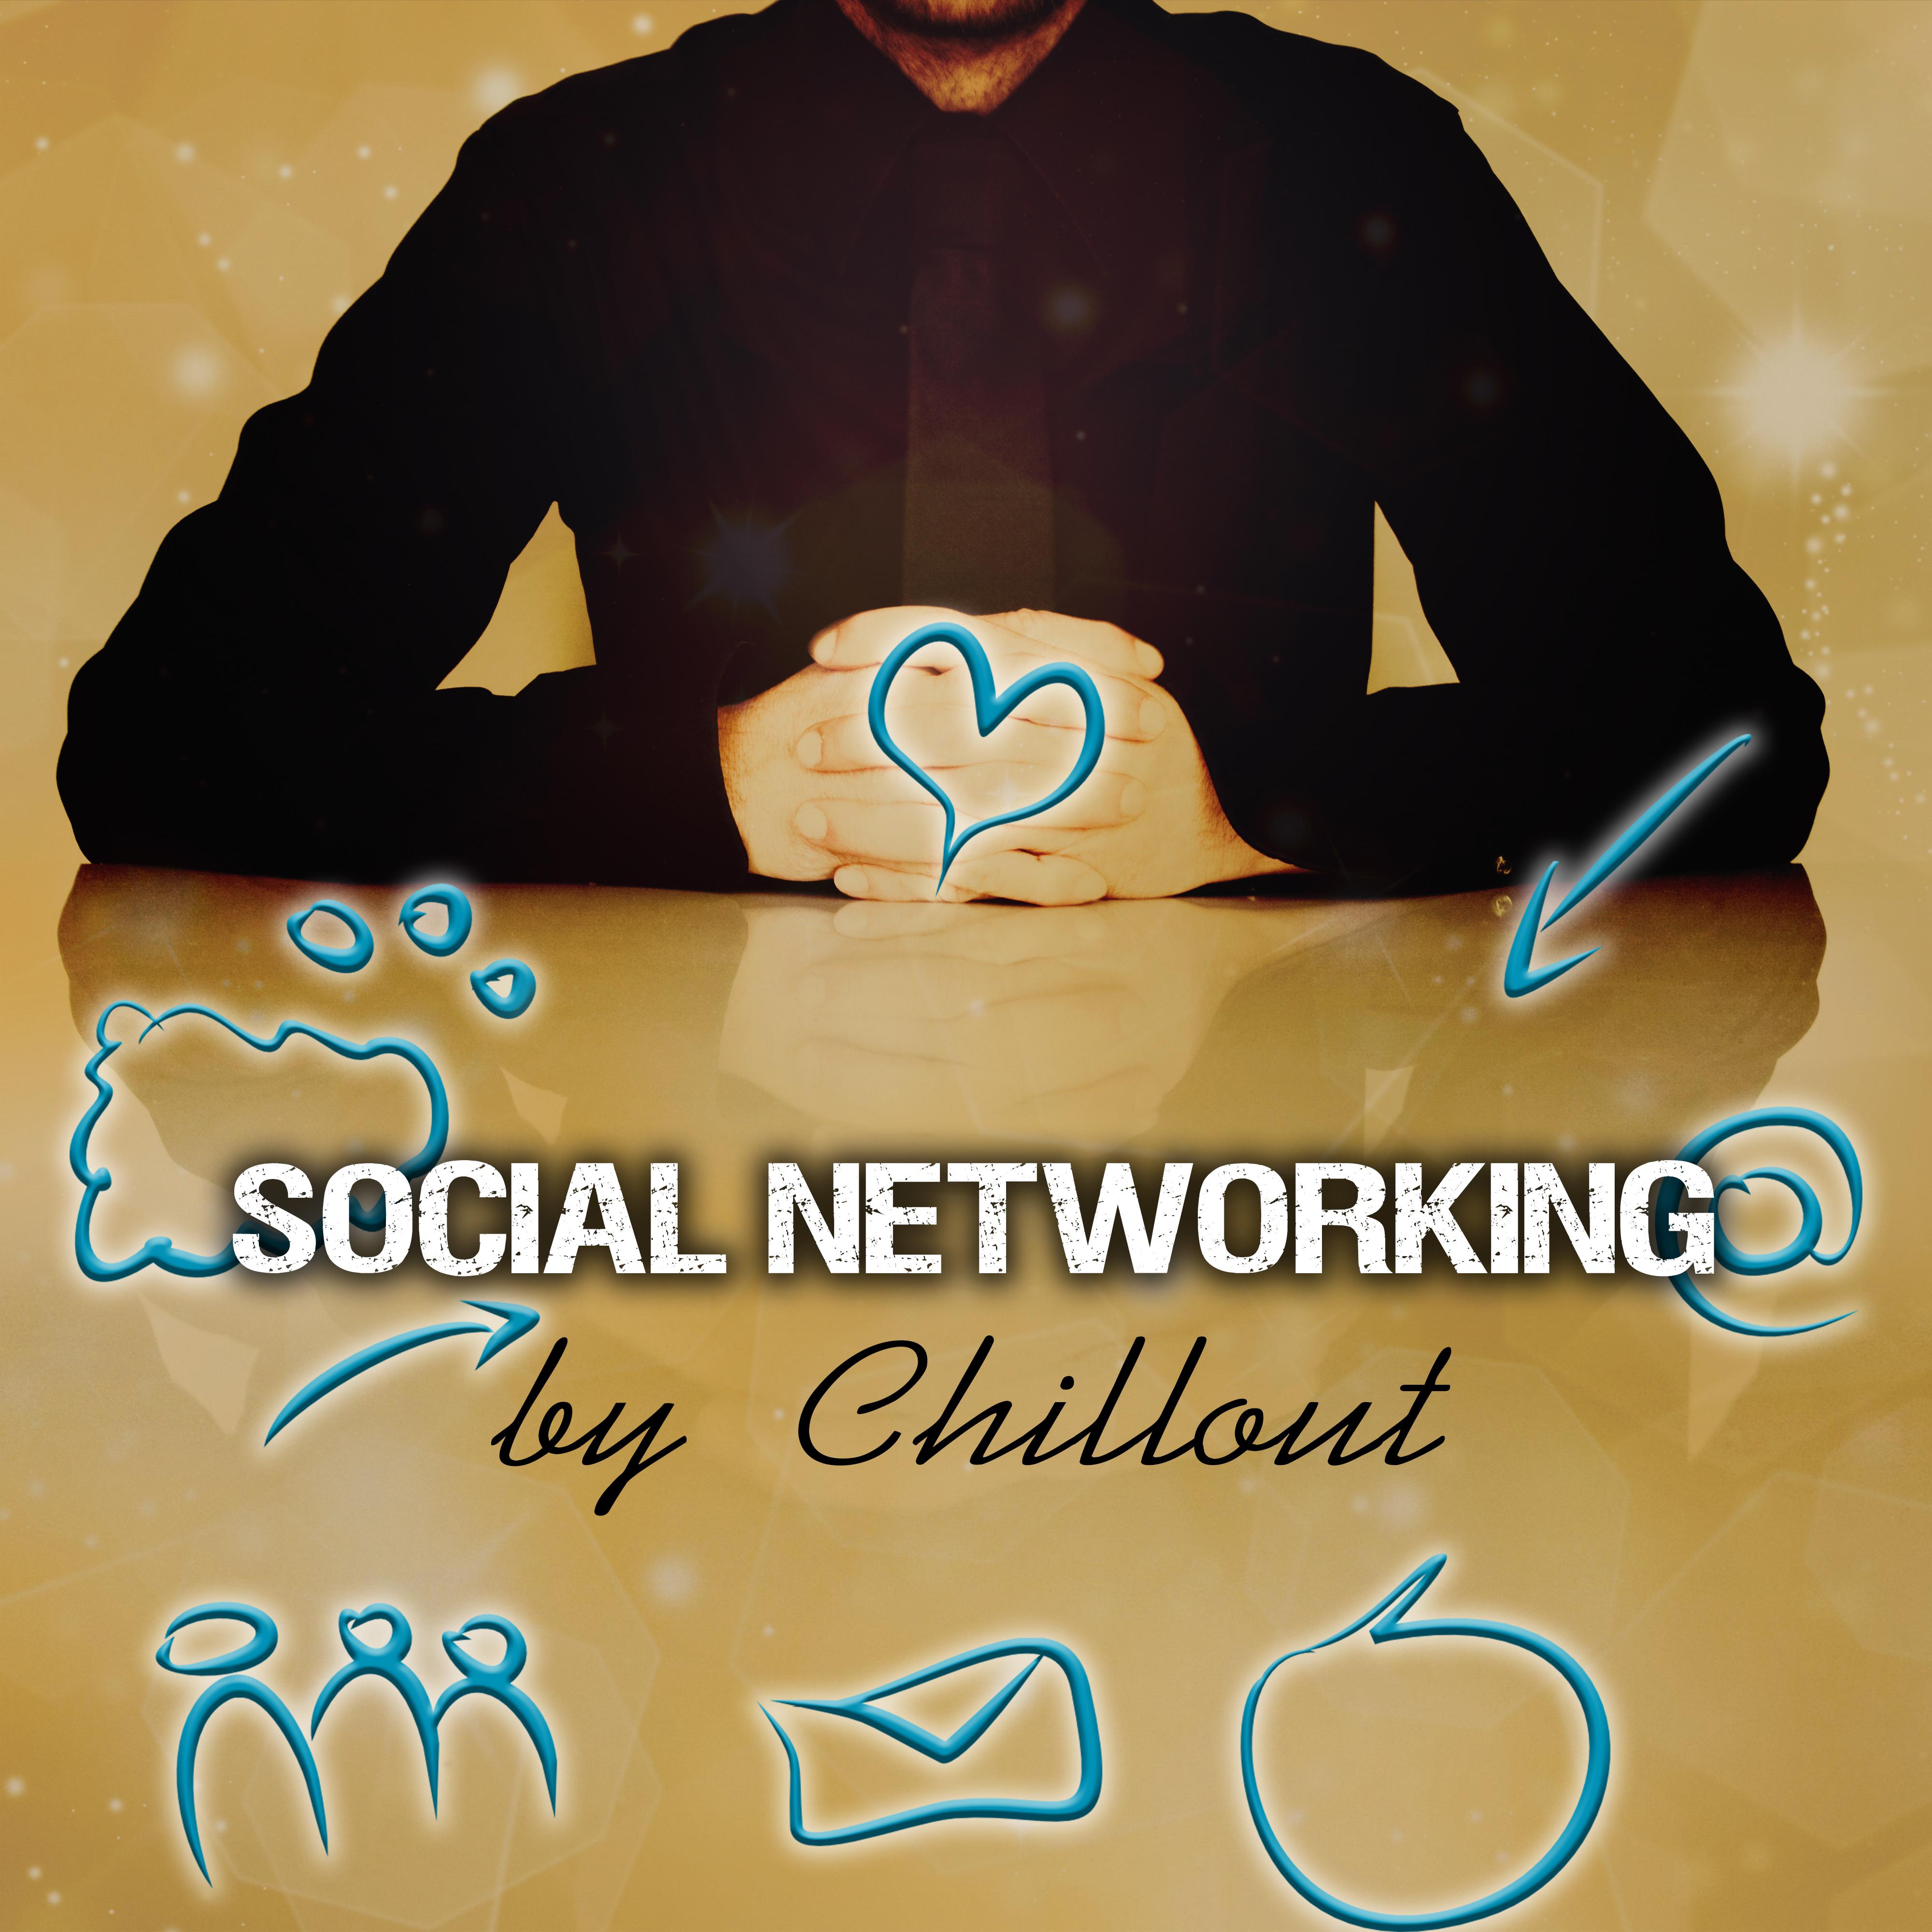 Social Networking by Chillout - Chill Out Music, Way of Life, Share It, On Line Meeting, Privacy, Comment, On Line Chat